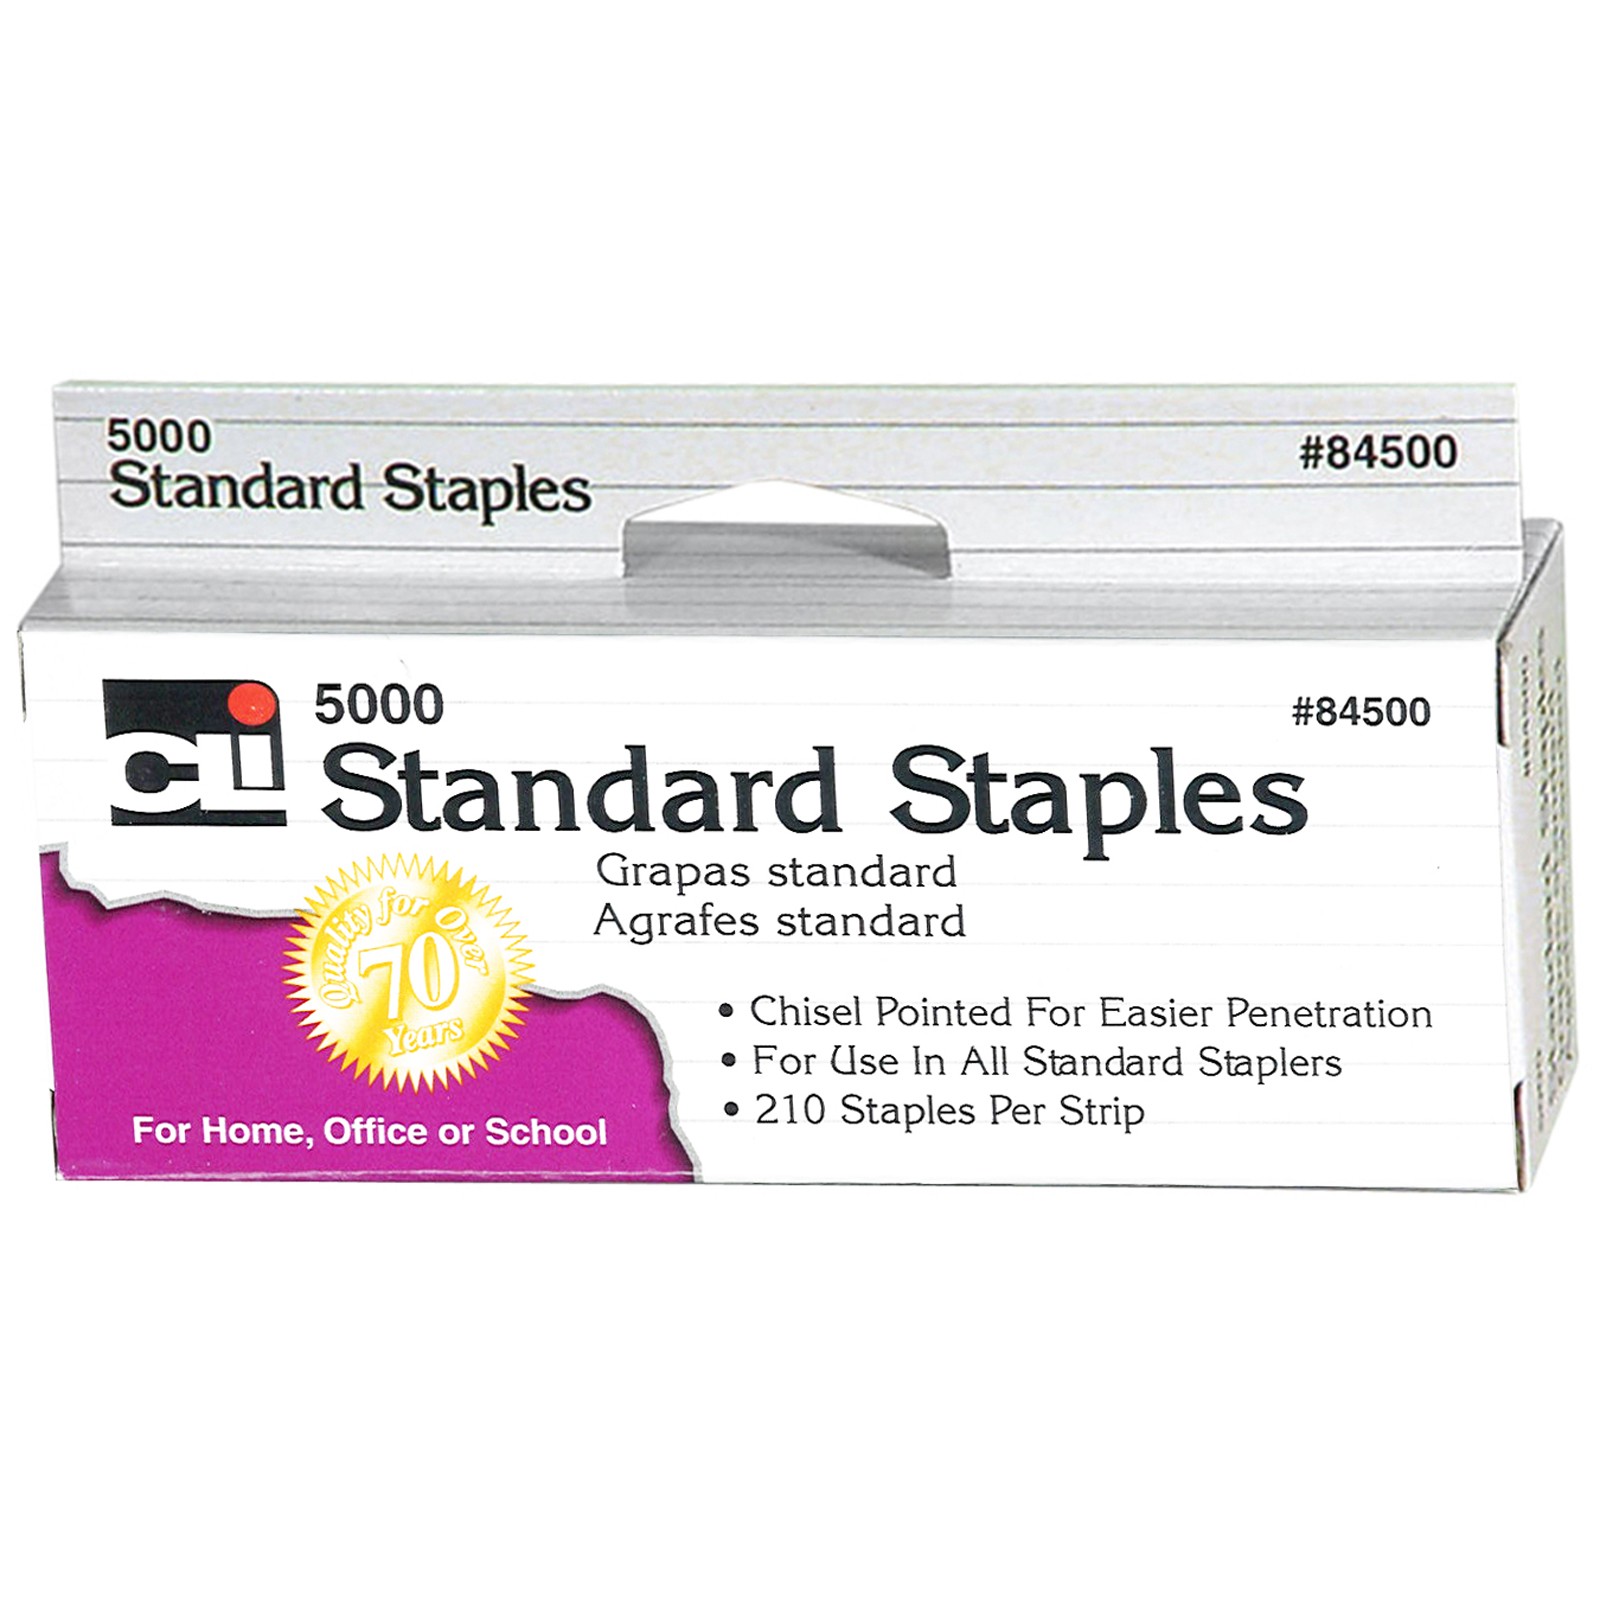 Staples, Standard 26/6 Size, Chisel Pointed Carbon Steel, Silver, 5000/Box